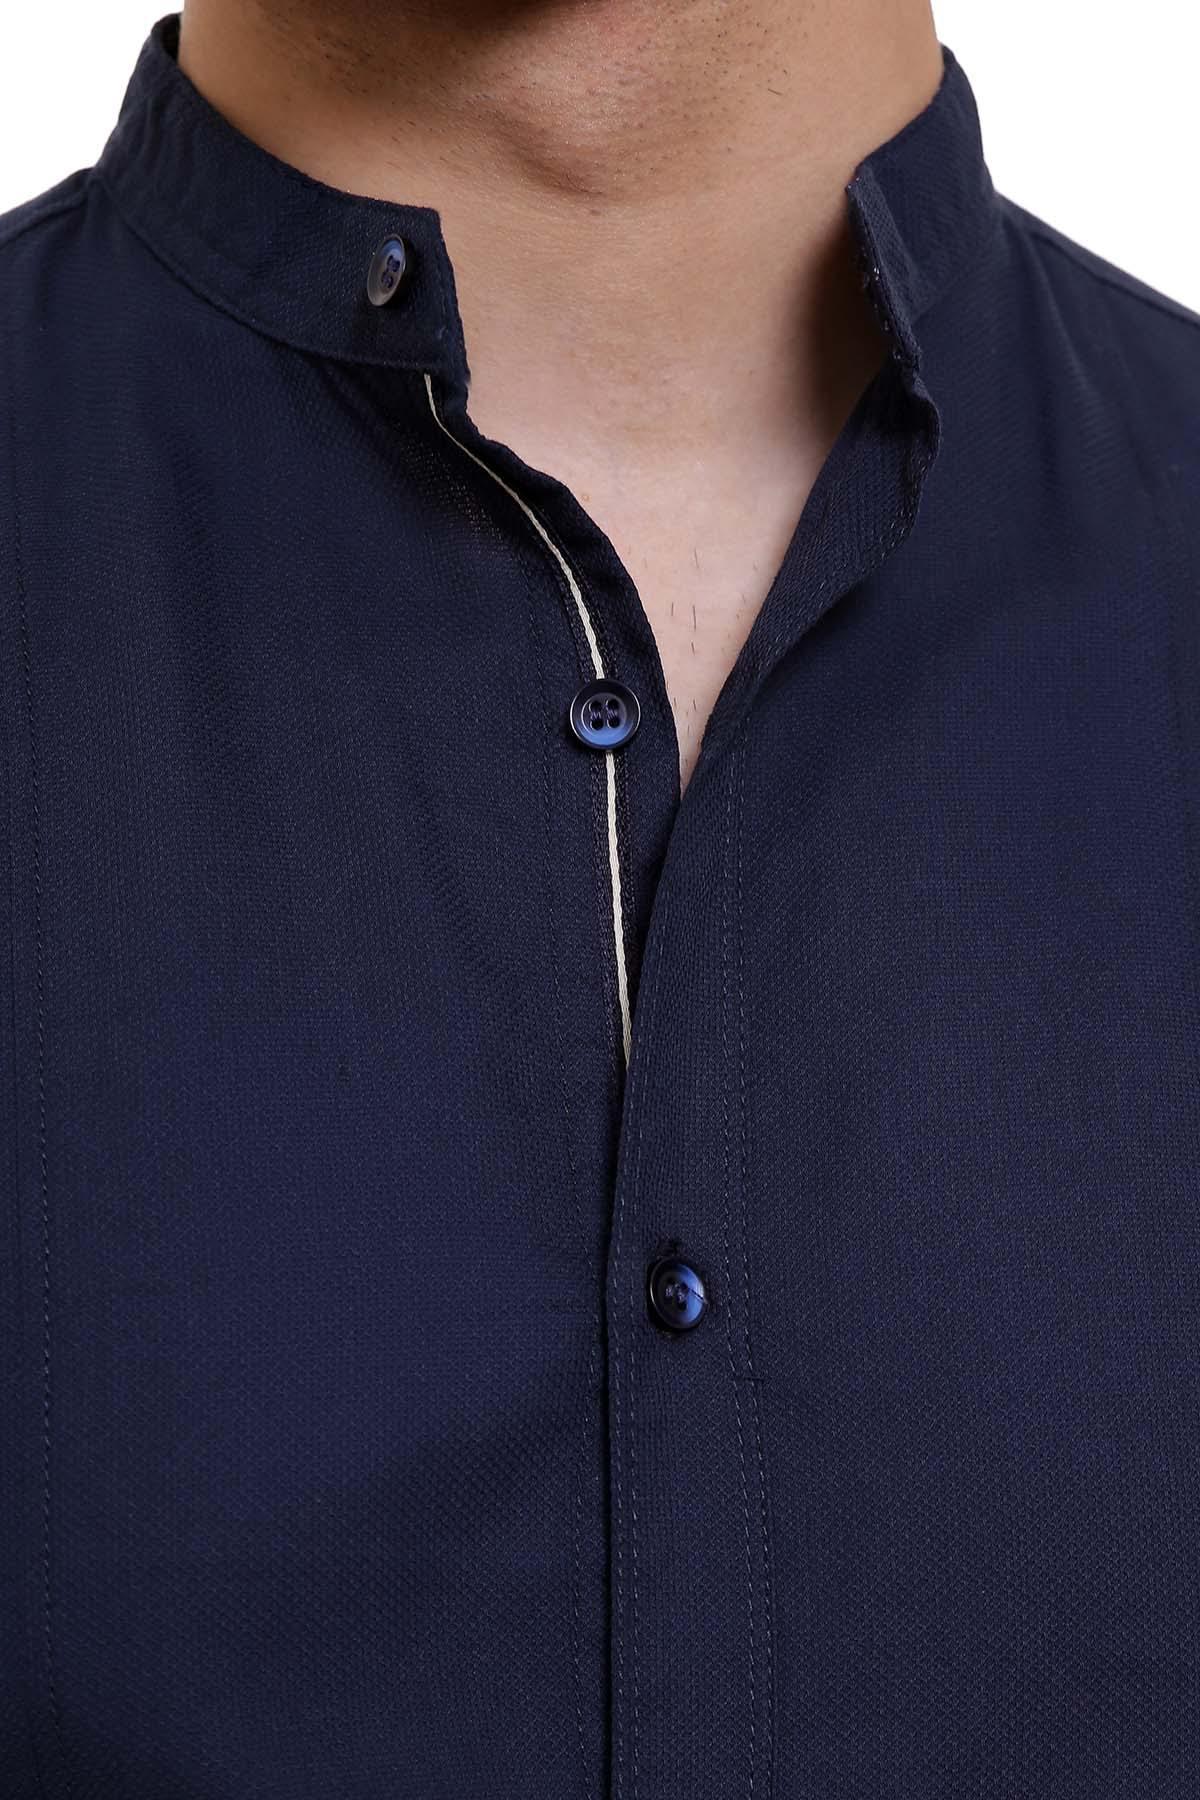 CASUAL SHIRT FULL SLEEVE NAVY  SLIM FIT at Charcoal Clothing